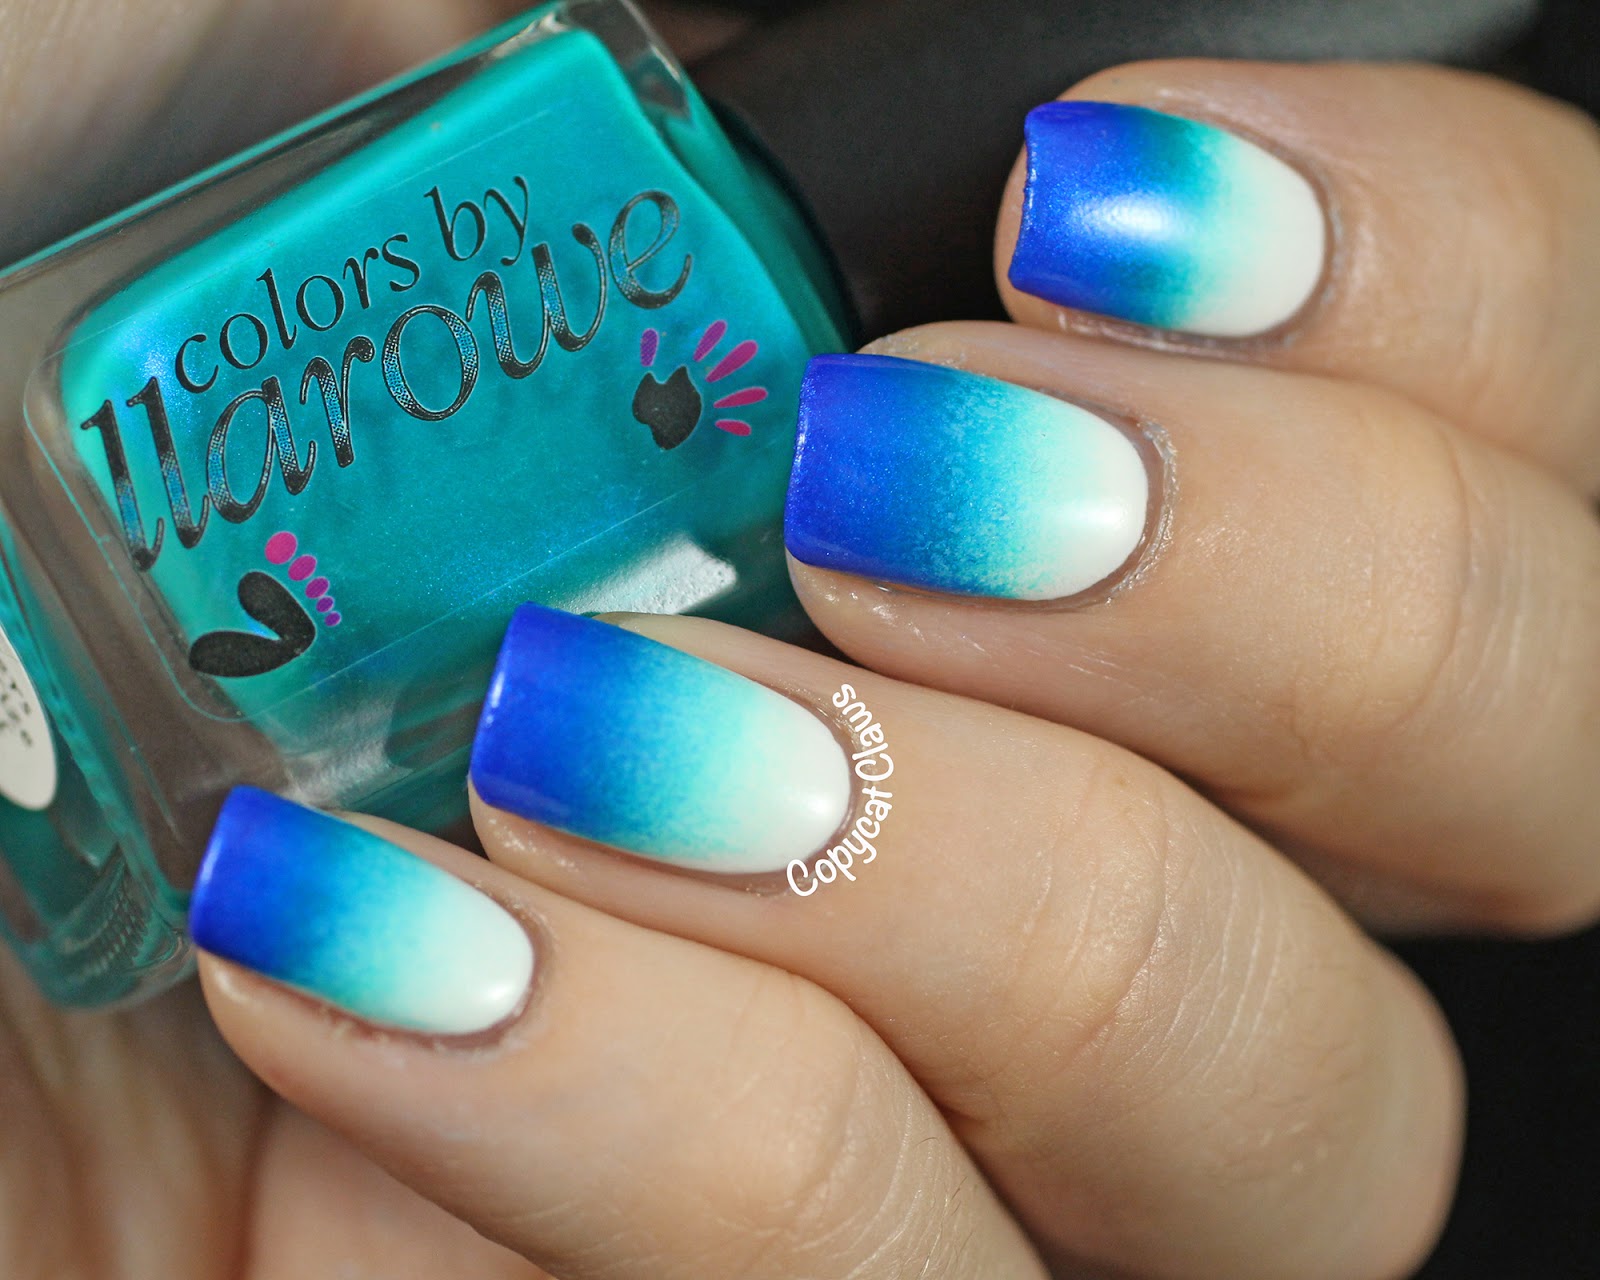 Copycat Claws: Beachy Blue-White Gradient Nails